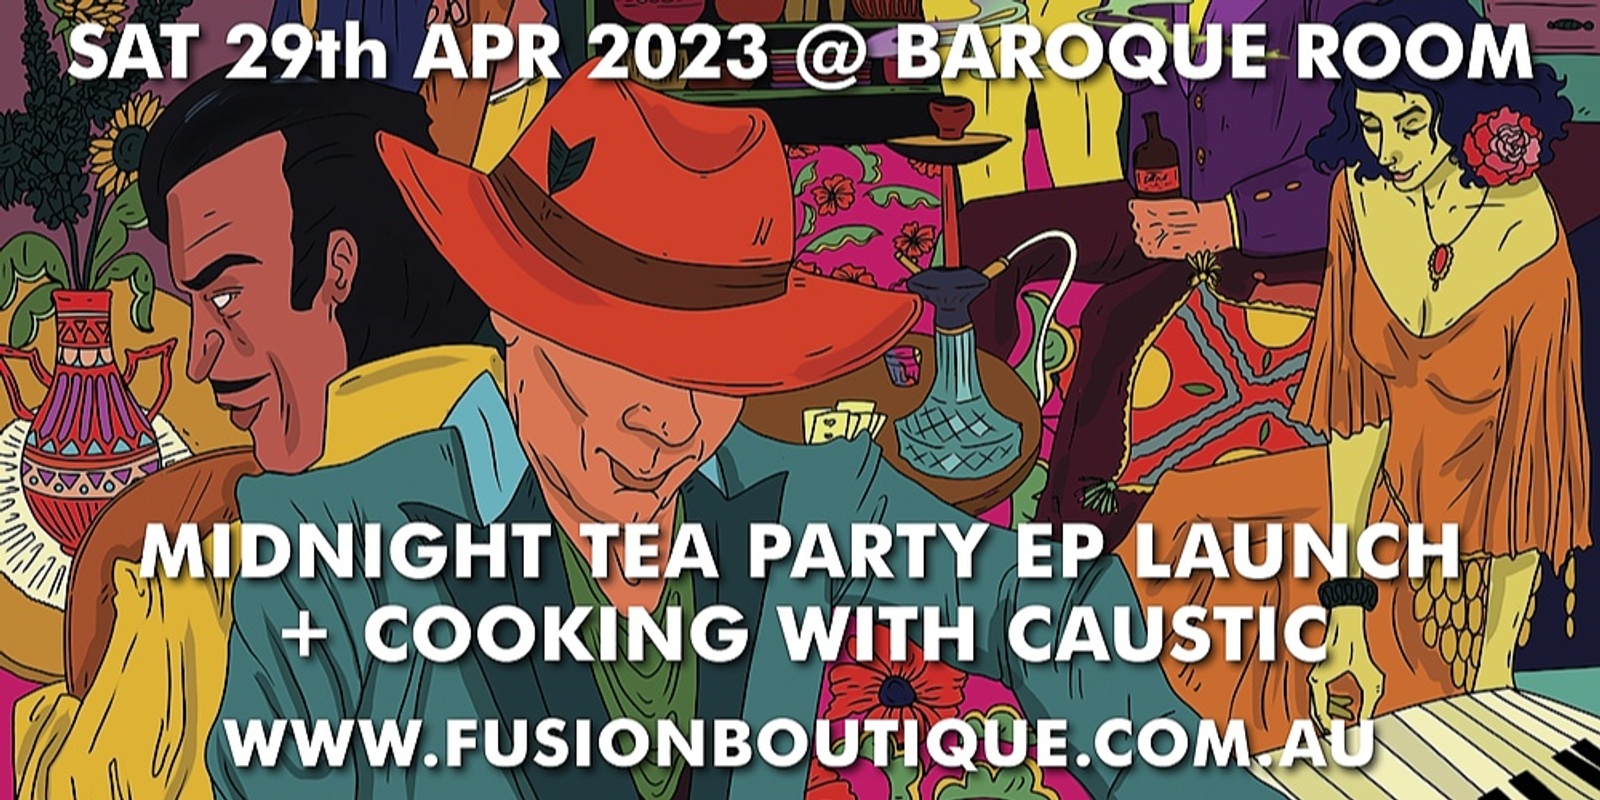 Banner image for MIDNIGHT TEA PARTY EP Launch + COOKING WITH CAUSTIC Live at the Baroque Room, Katoomba, Blue Mountains